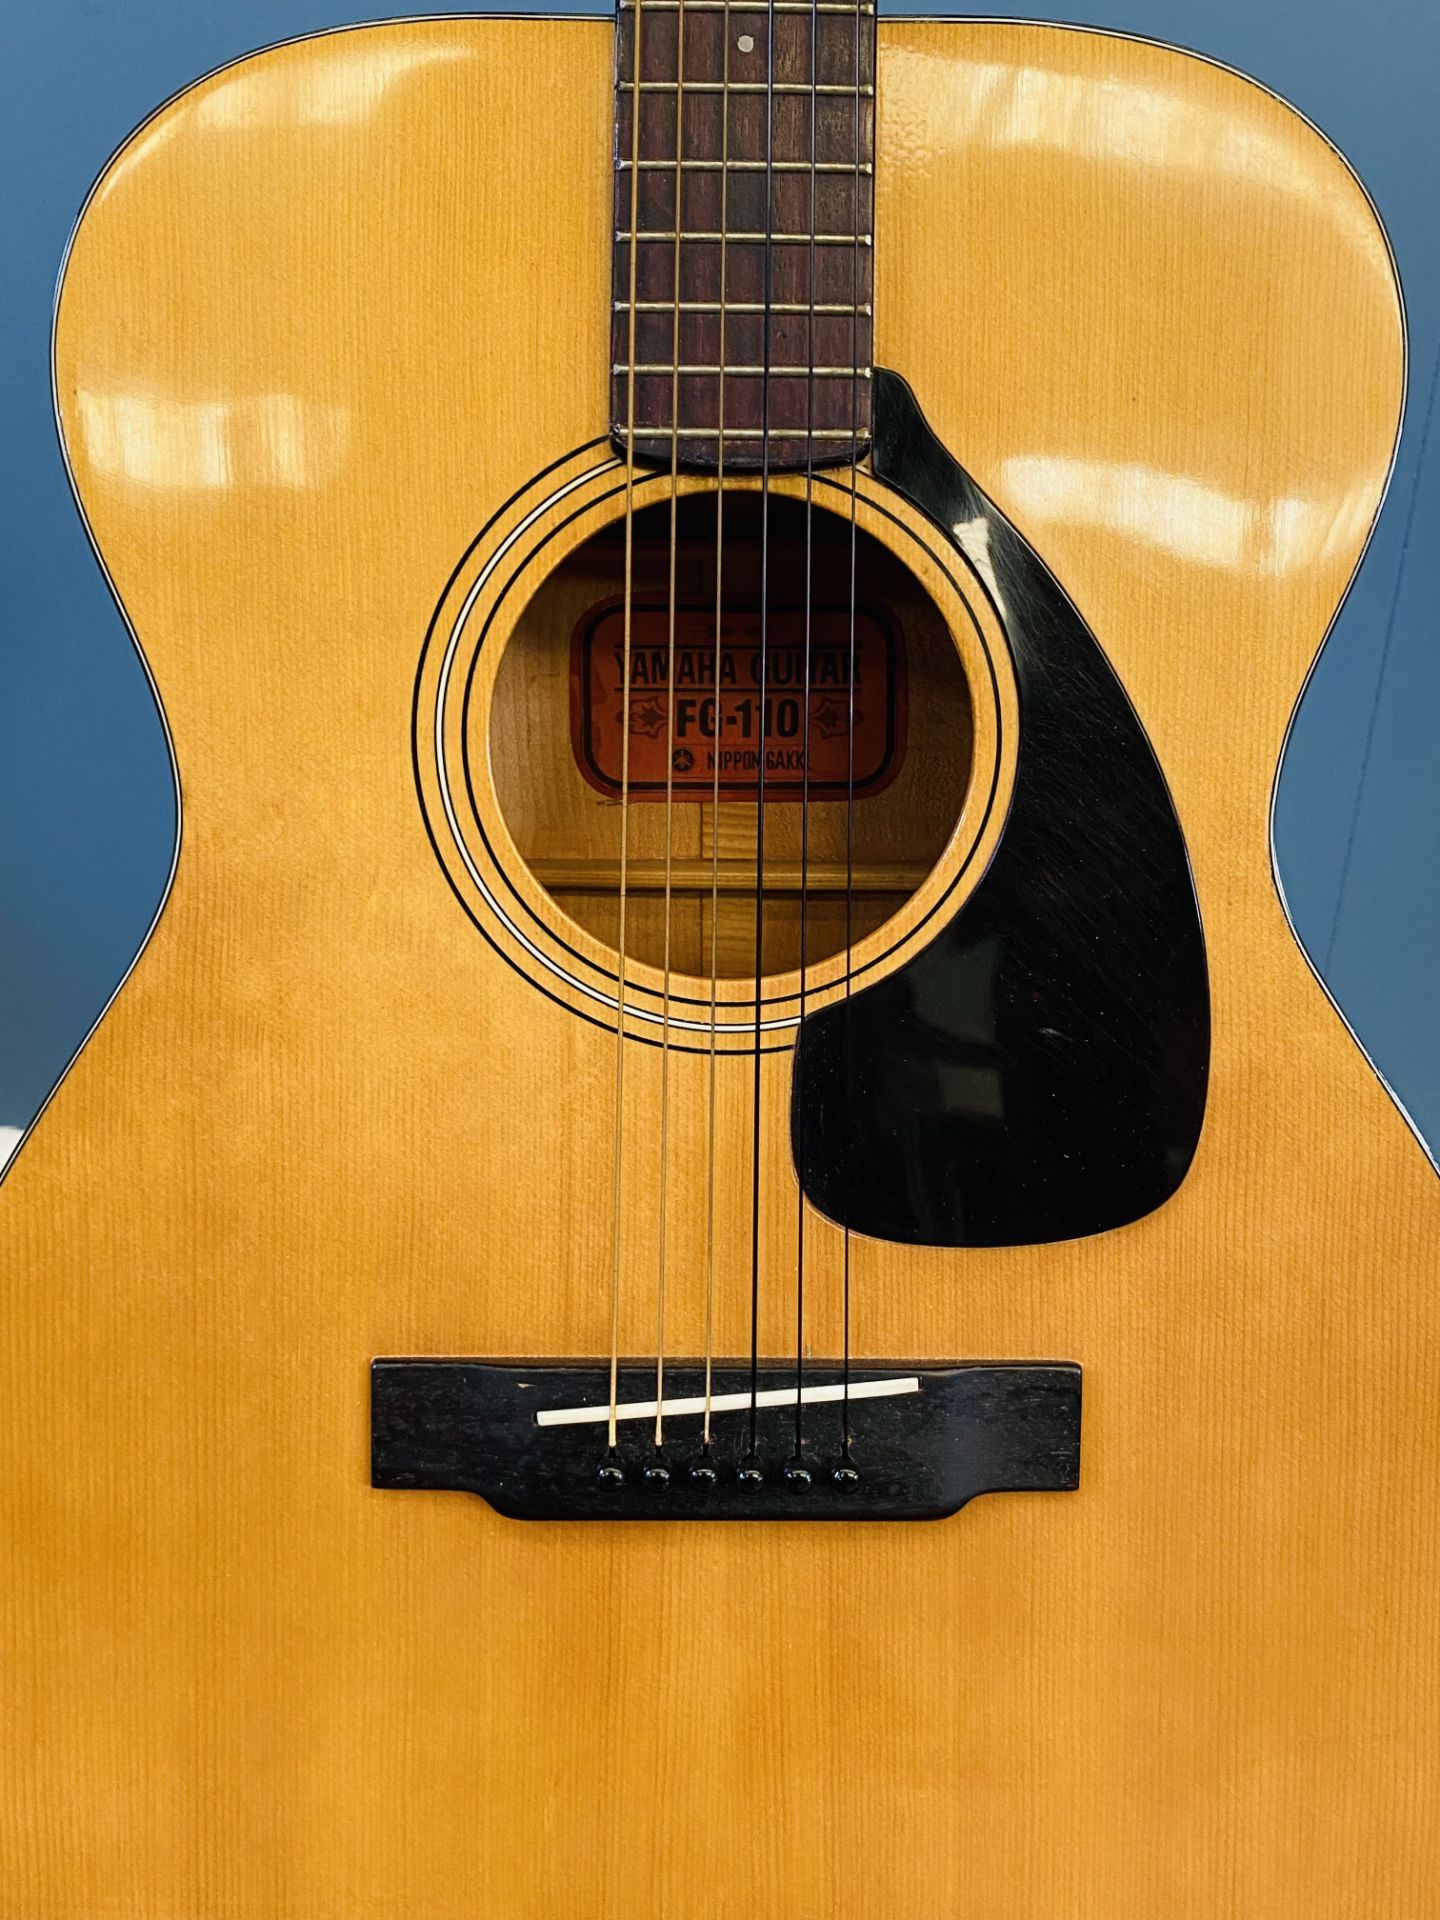 Yamaha FG-10 acoustic guitar in case - Image 3 of 4